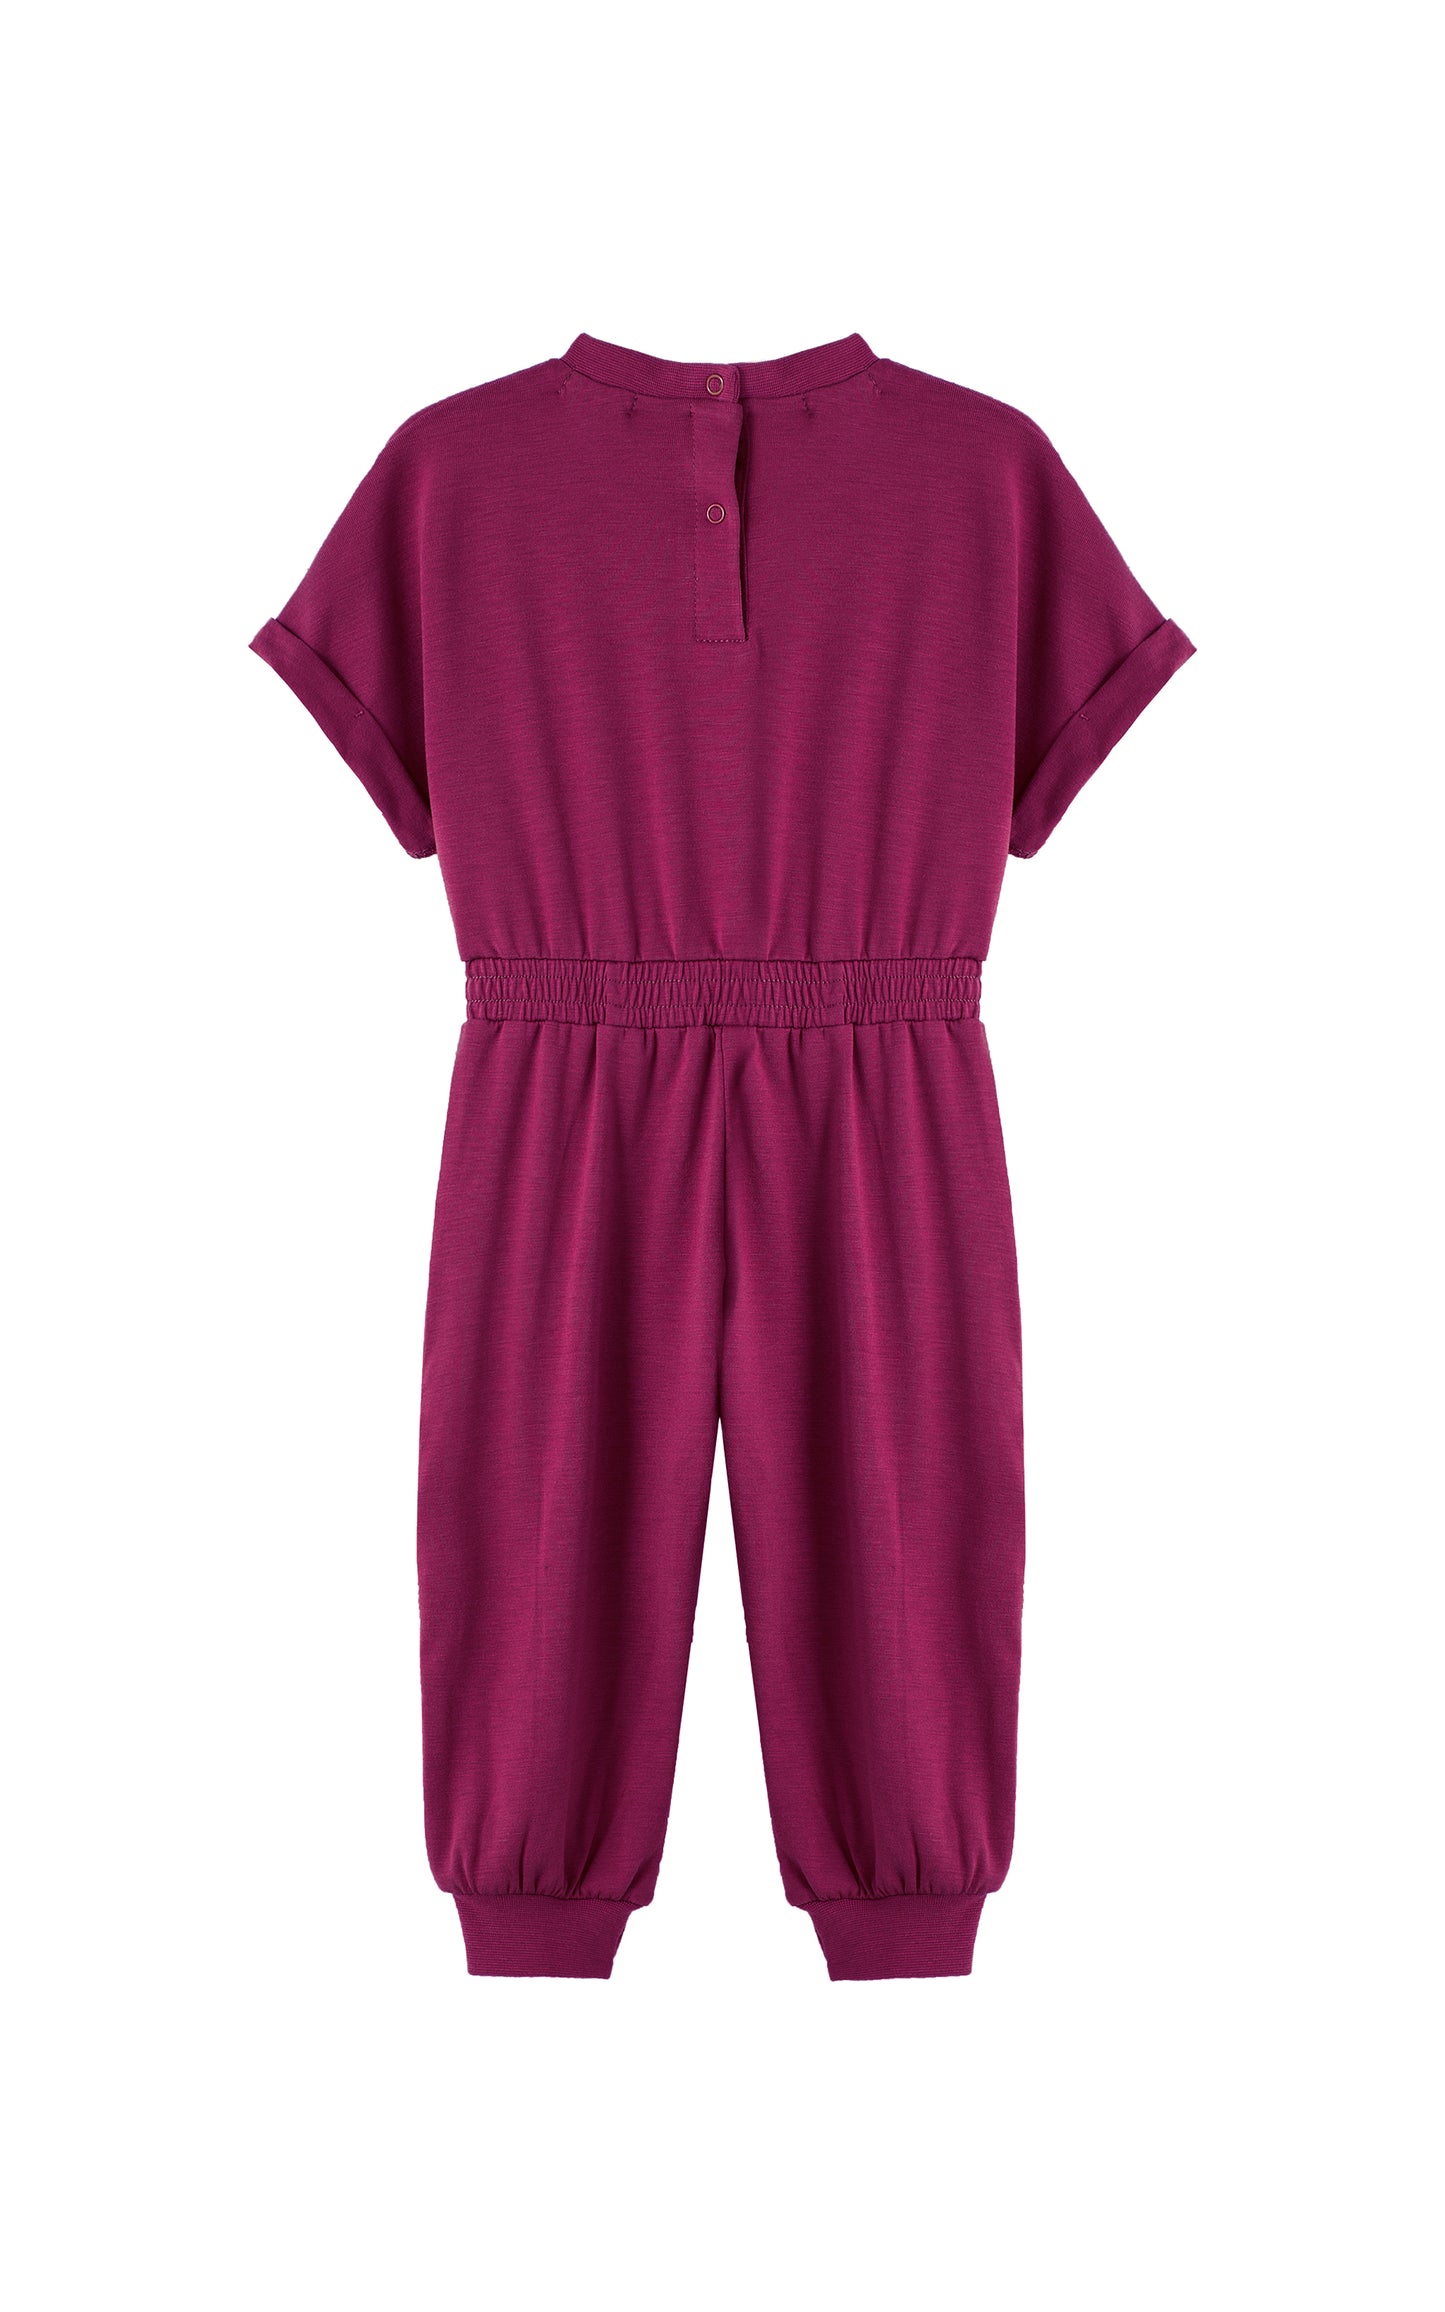 Back view of plum-colored romper with folded cuff sleeves.